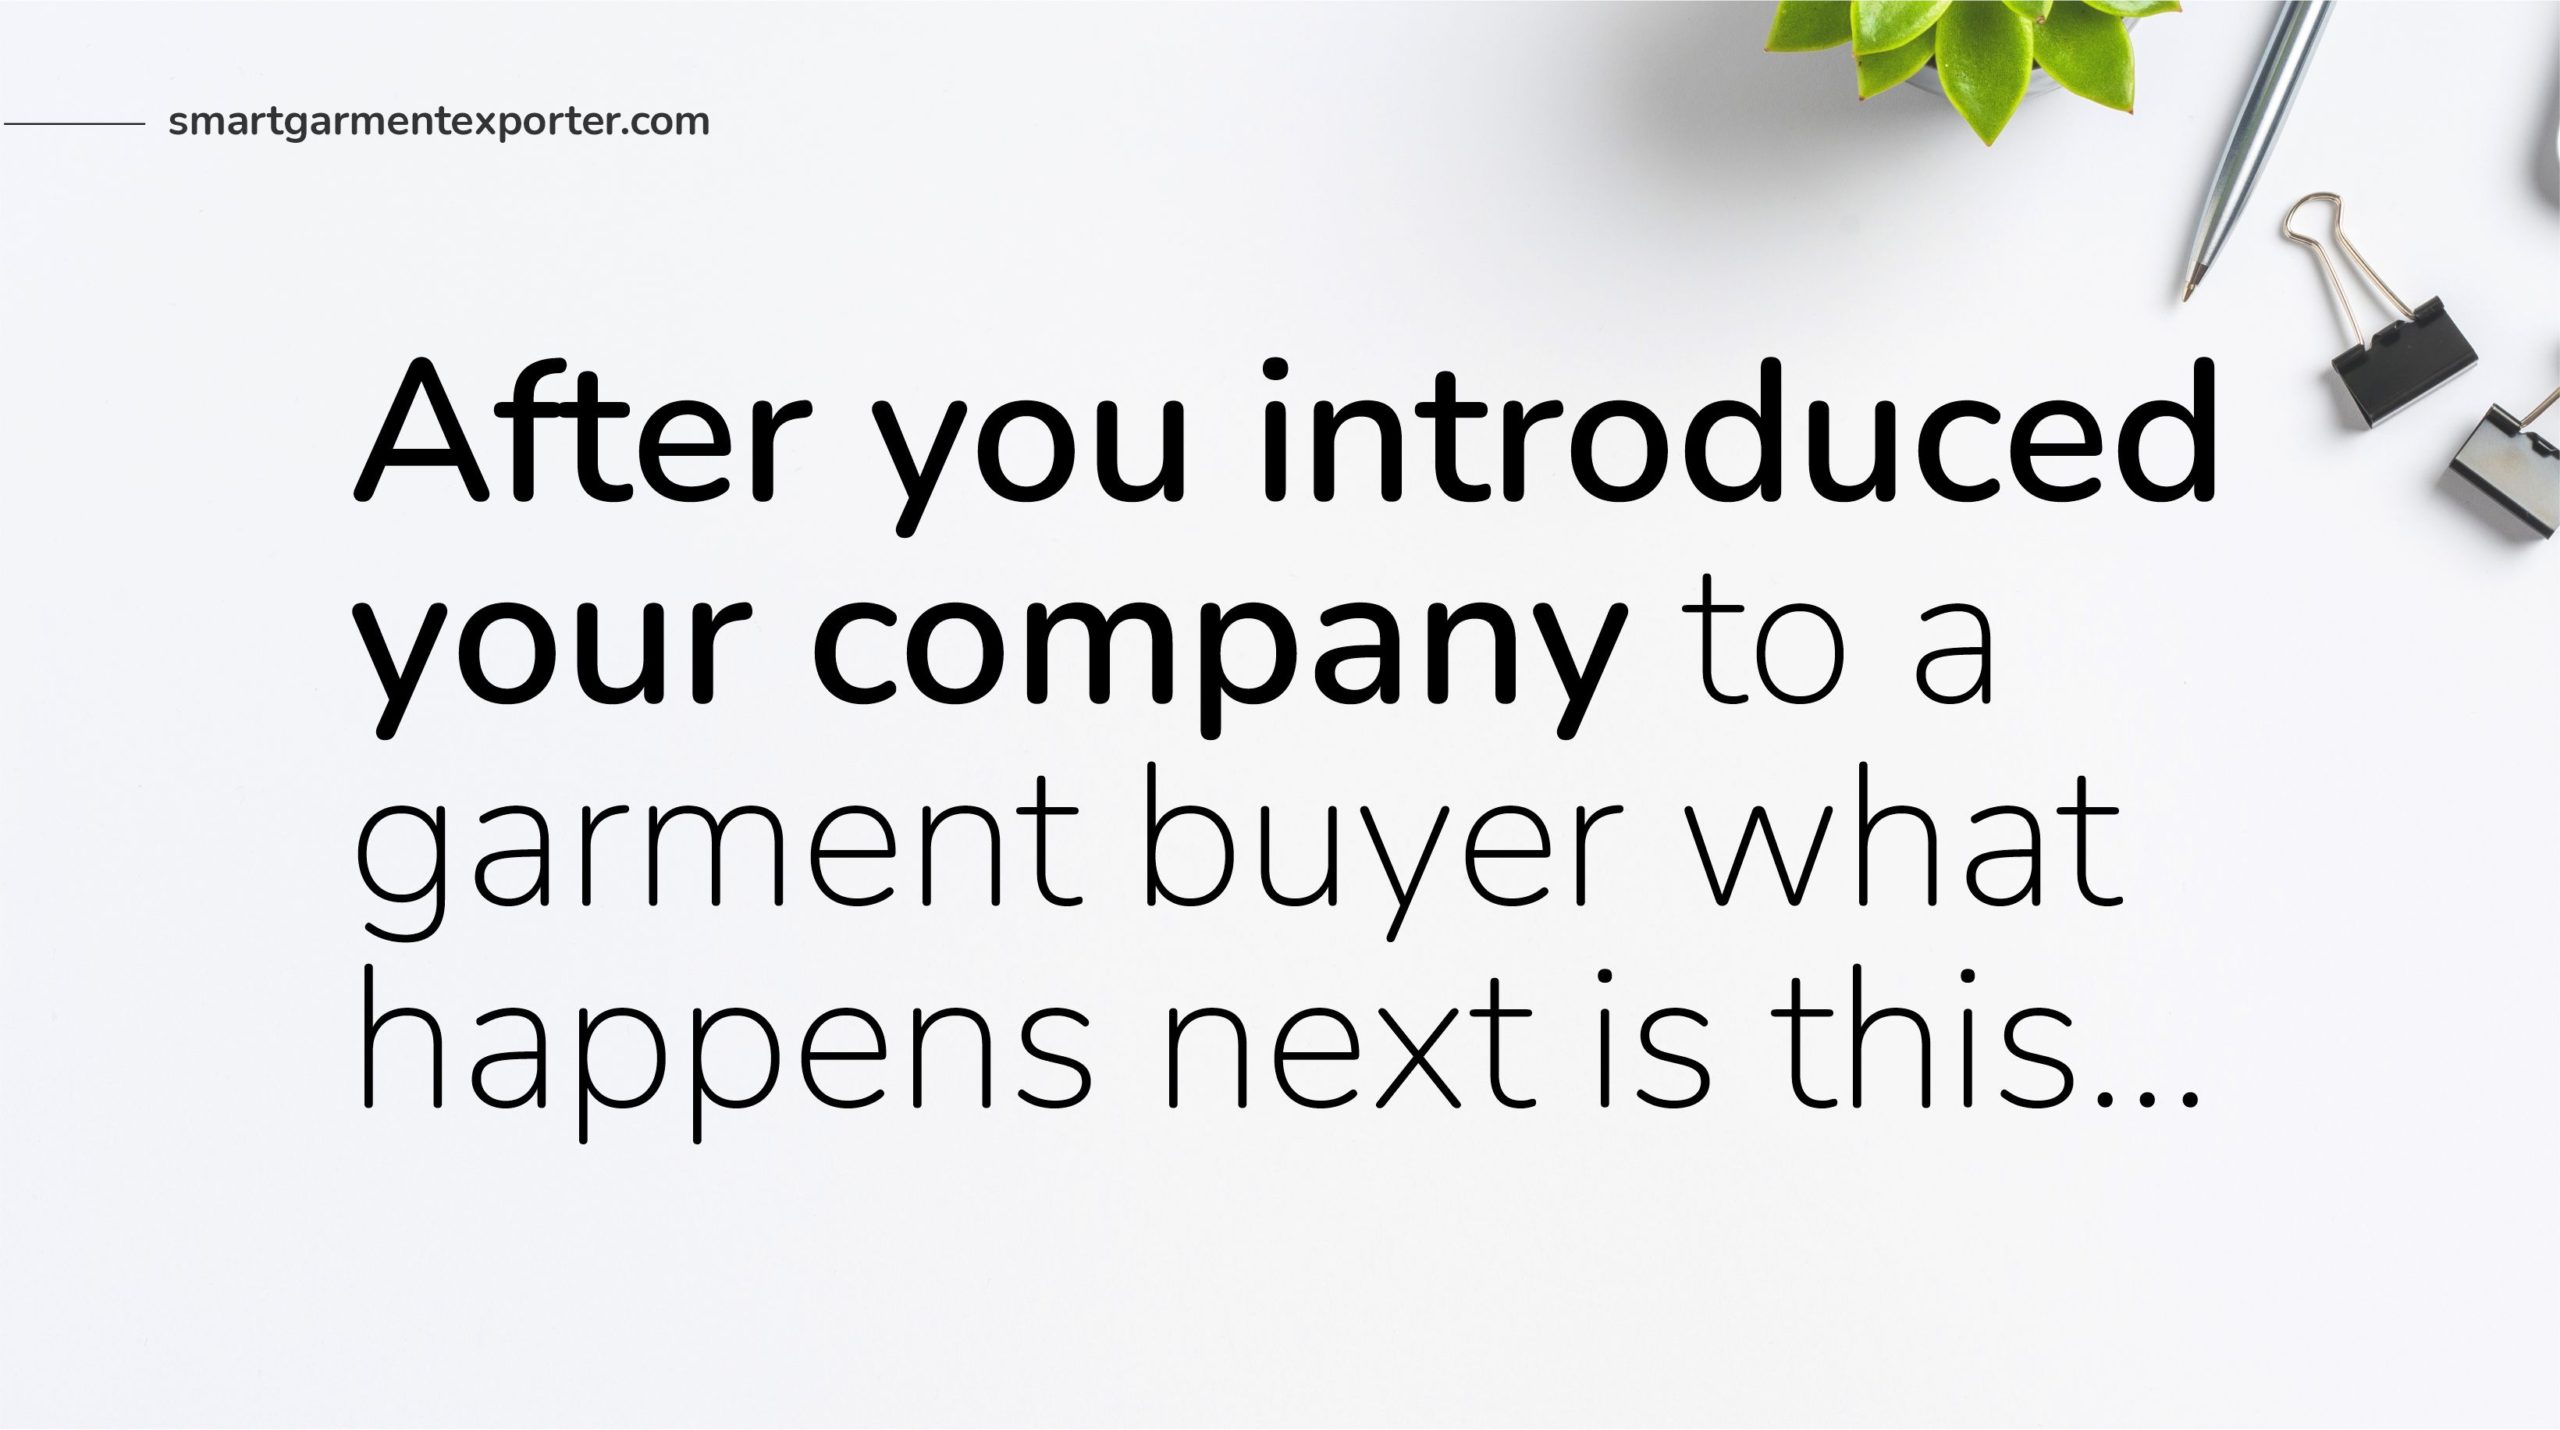 After you introduced your company to a garment buyer what happens next is this…